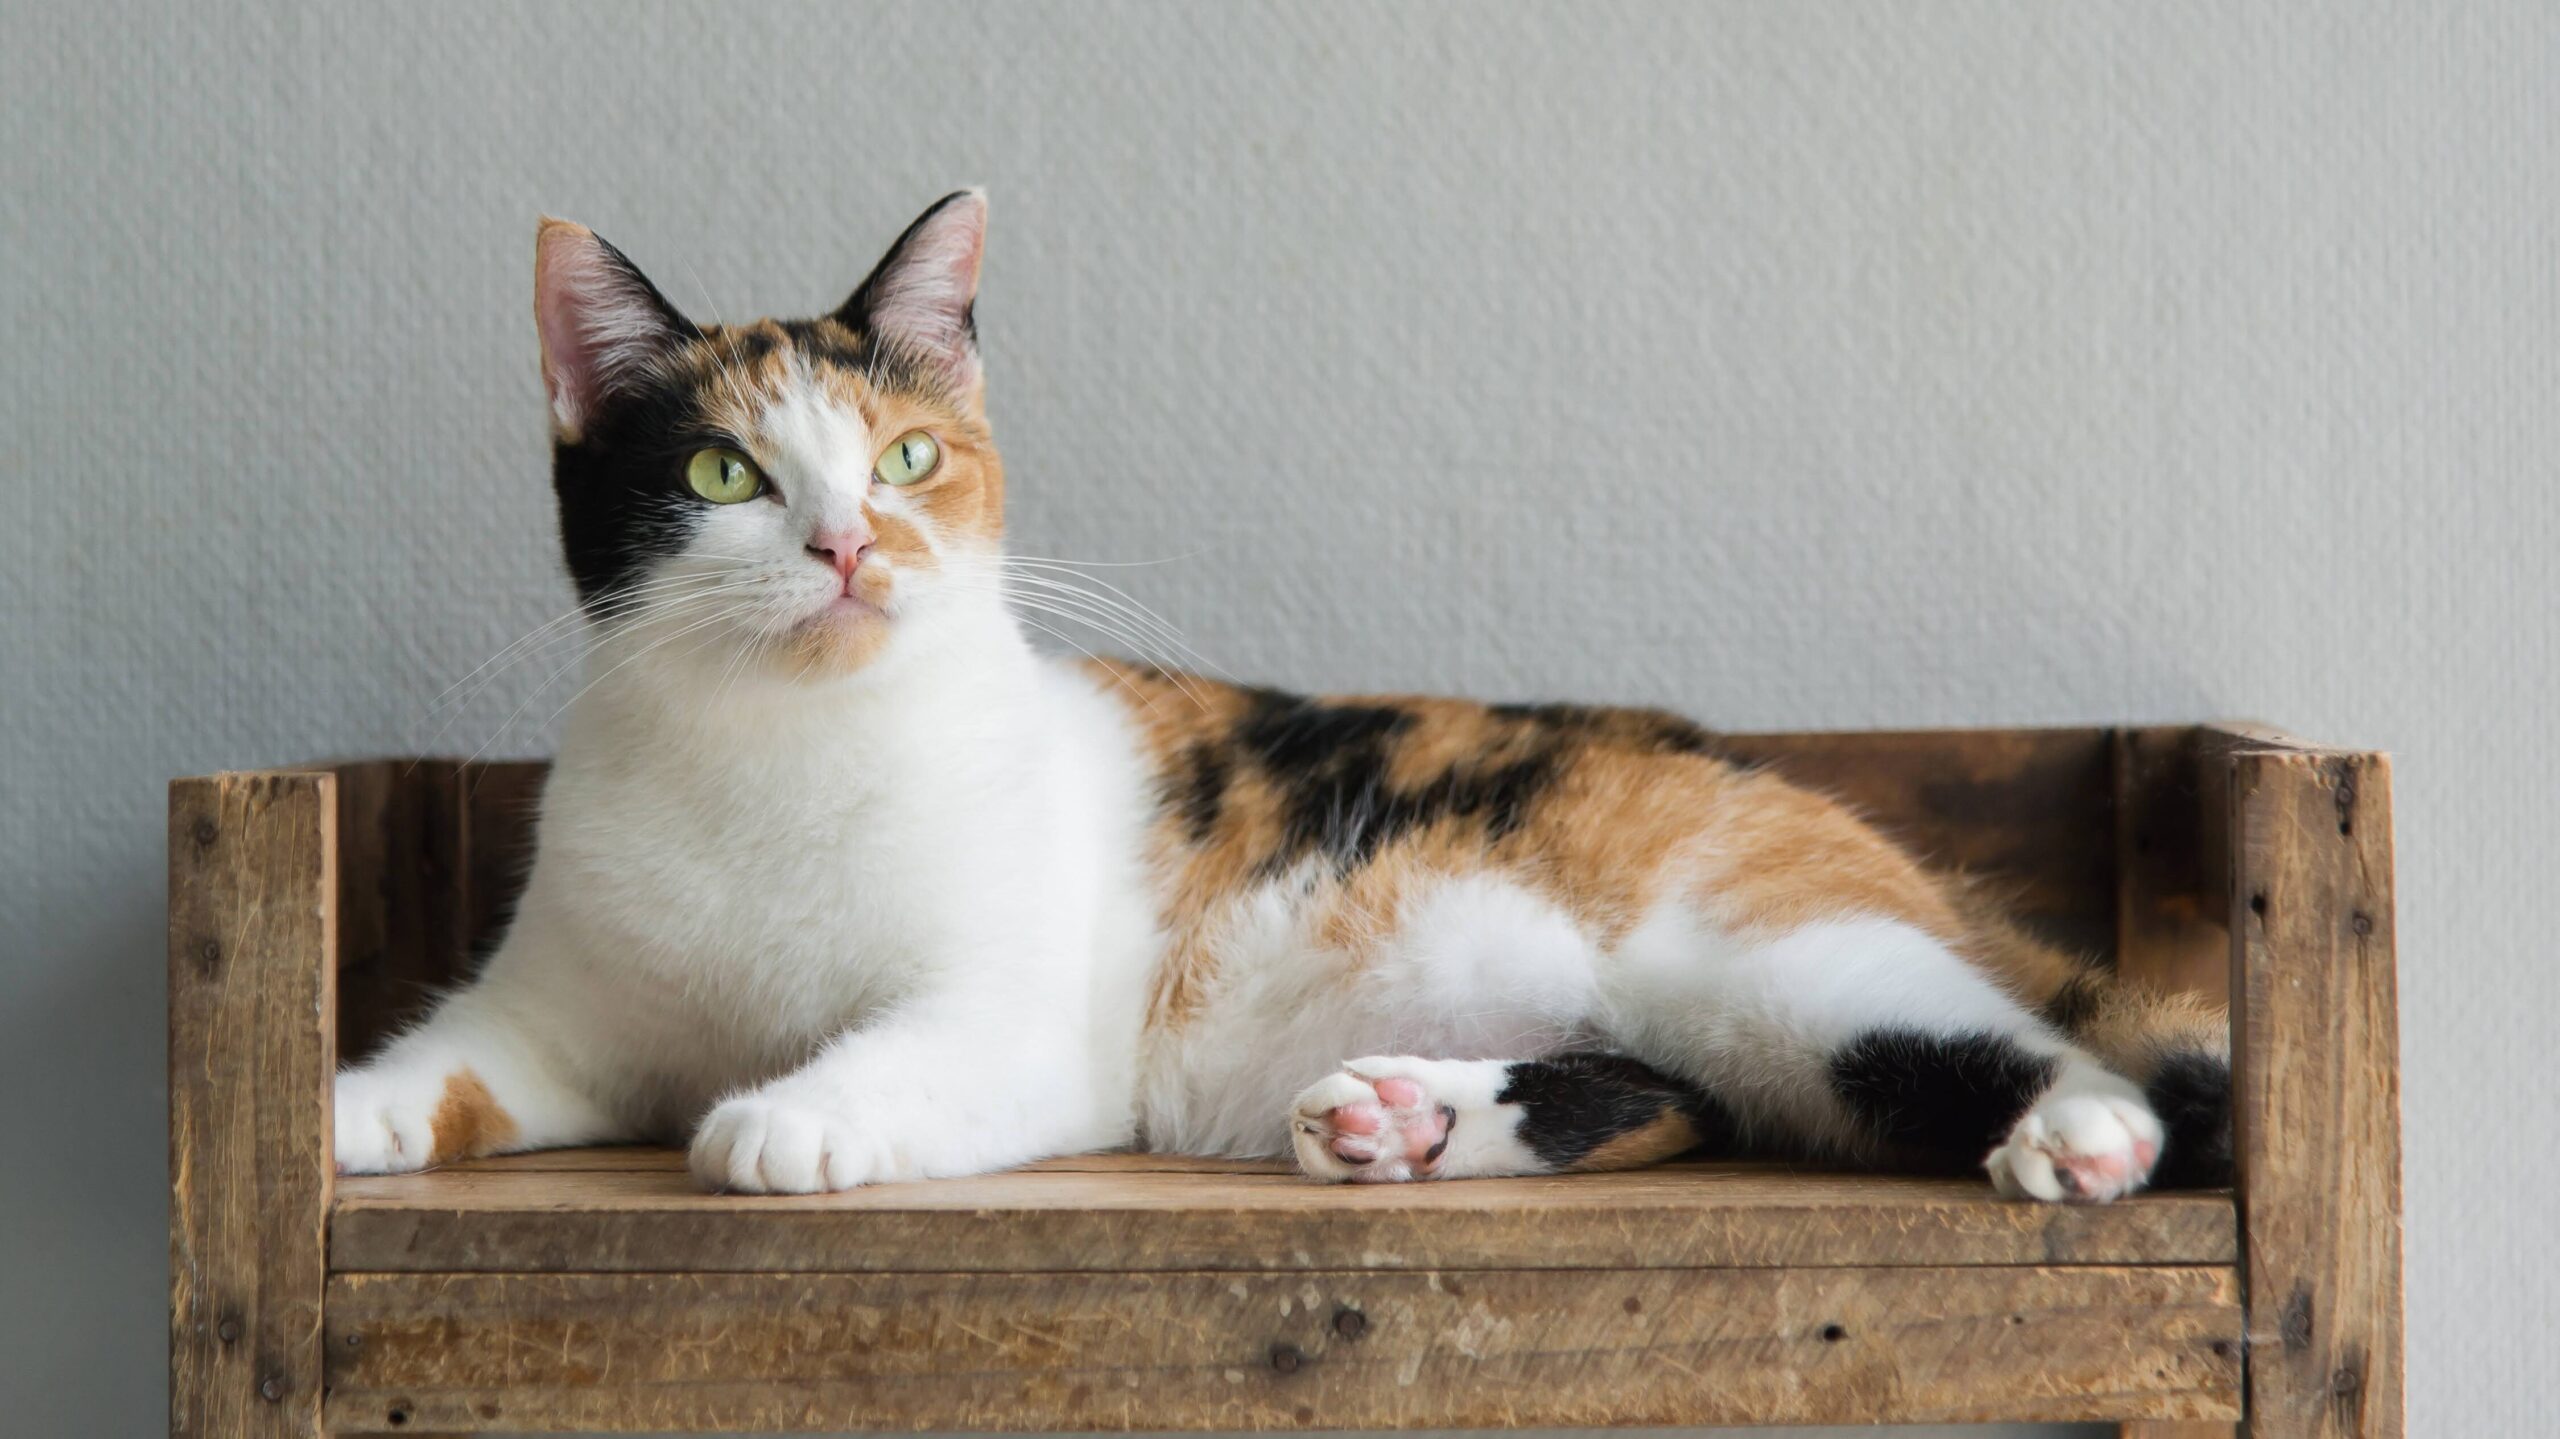 Cute calico cat lying and looking on old wood shelf